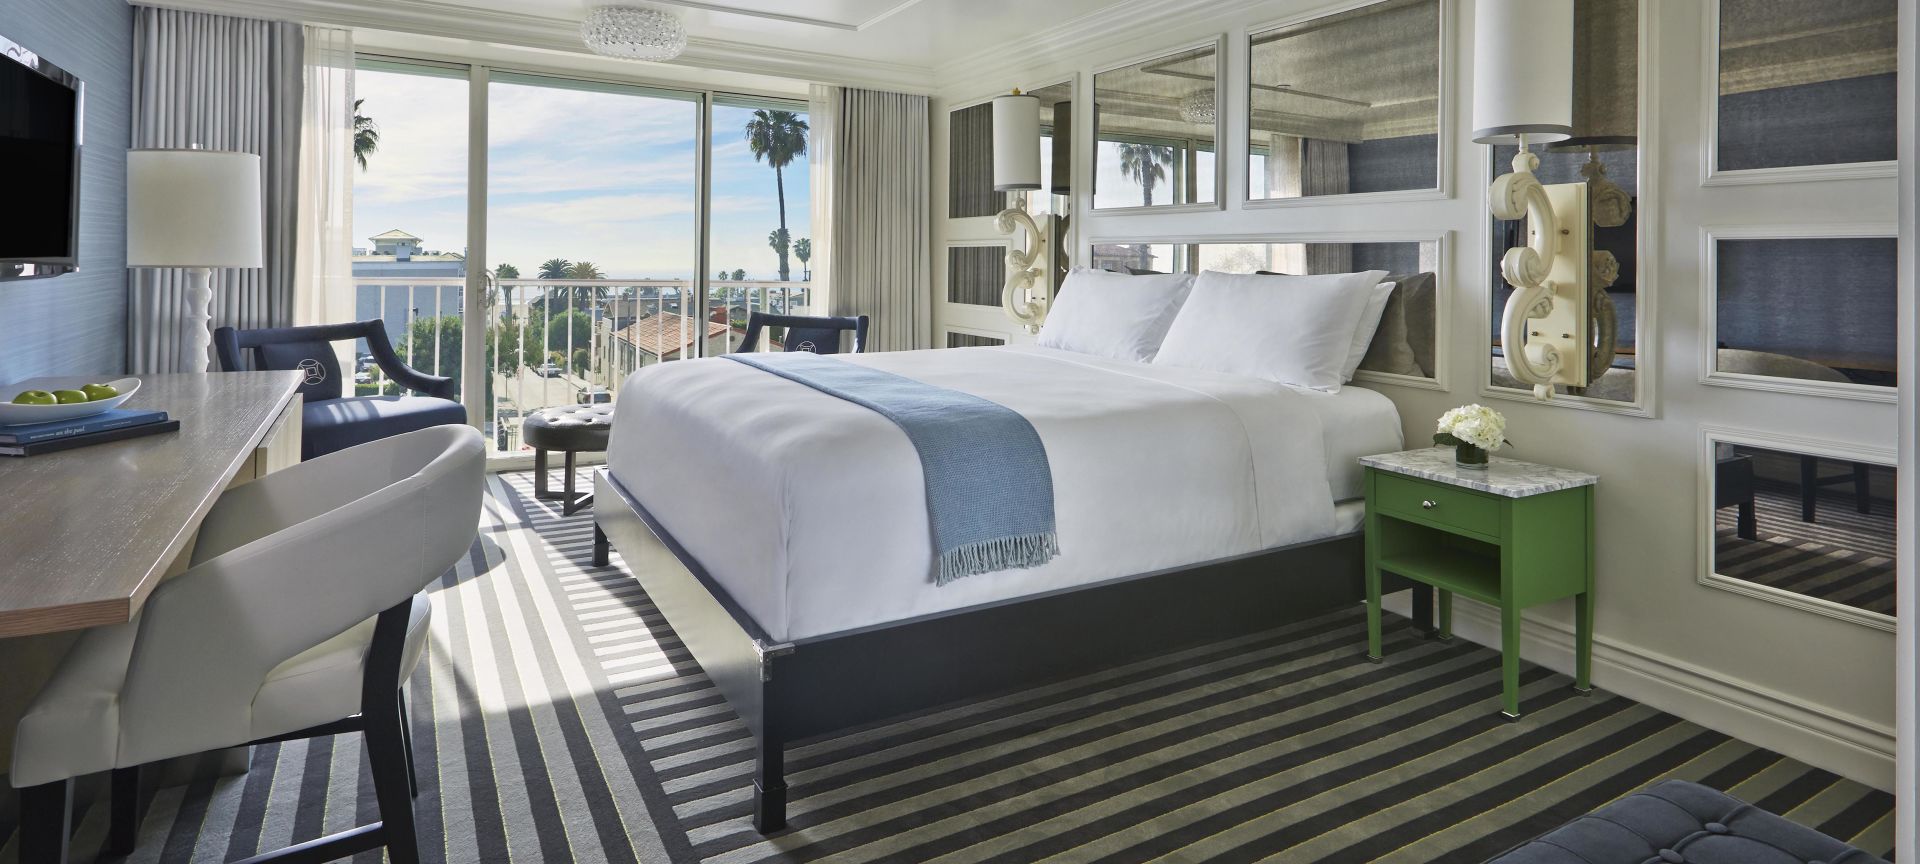 Viceroy Santa Monica guestroom with a view 